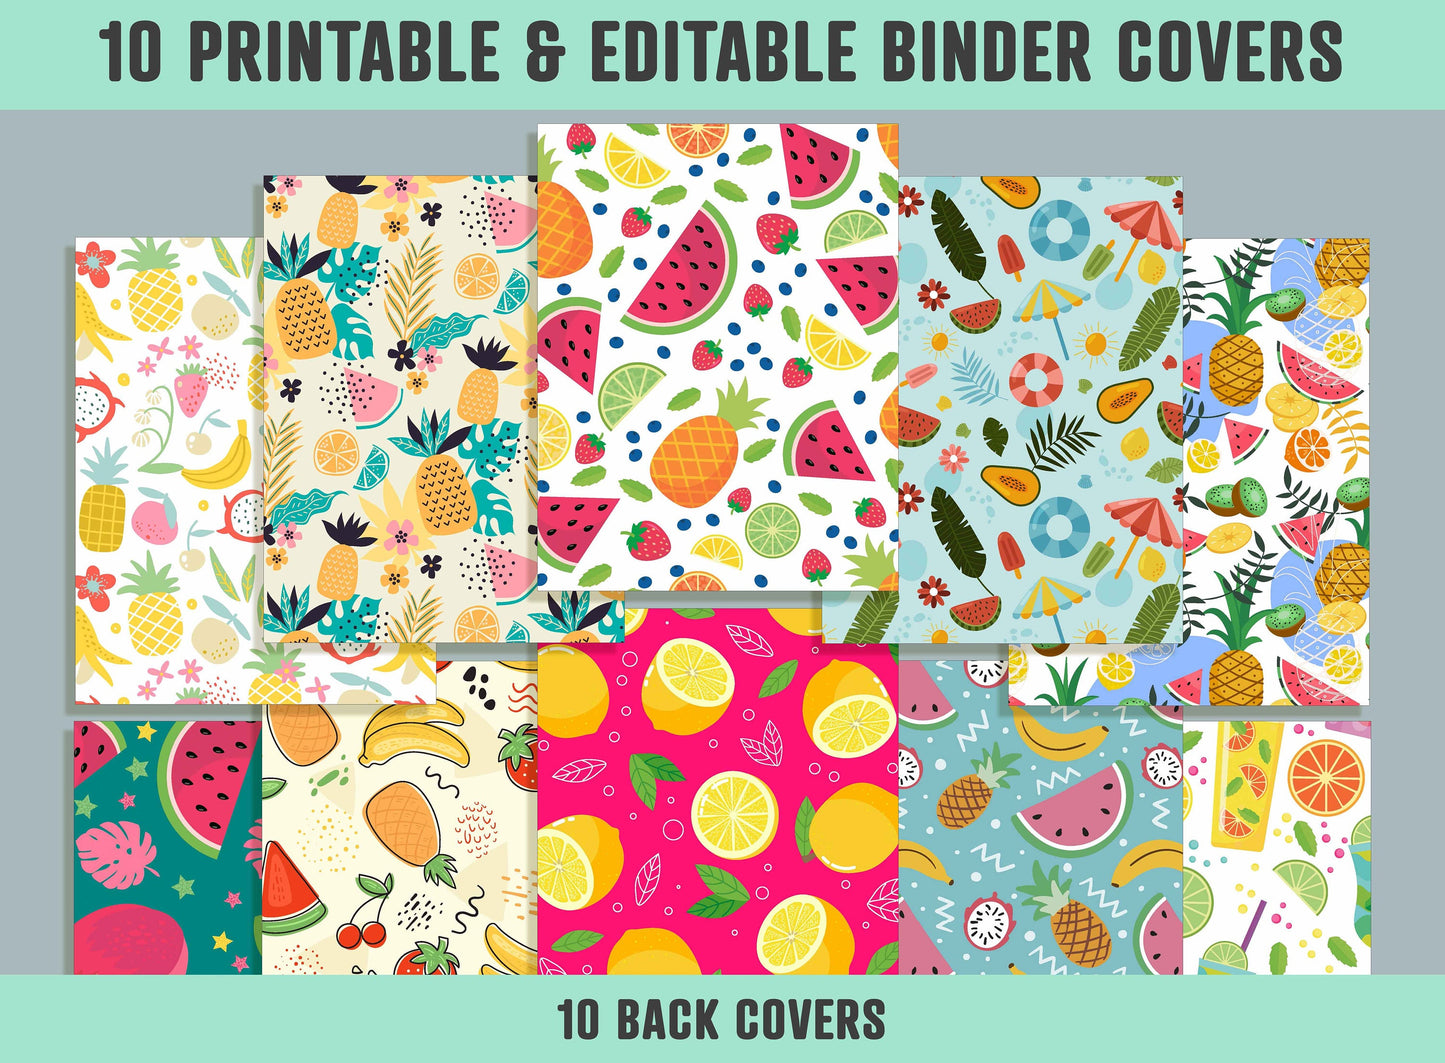 Summer Fruits and Berries Binder Cover, 10 Printable & Editable Covers+Spines, Teacher/School Binder, Planner Cover Template, Binder Inserts